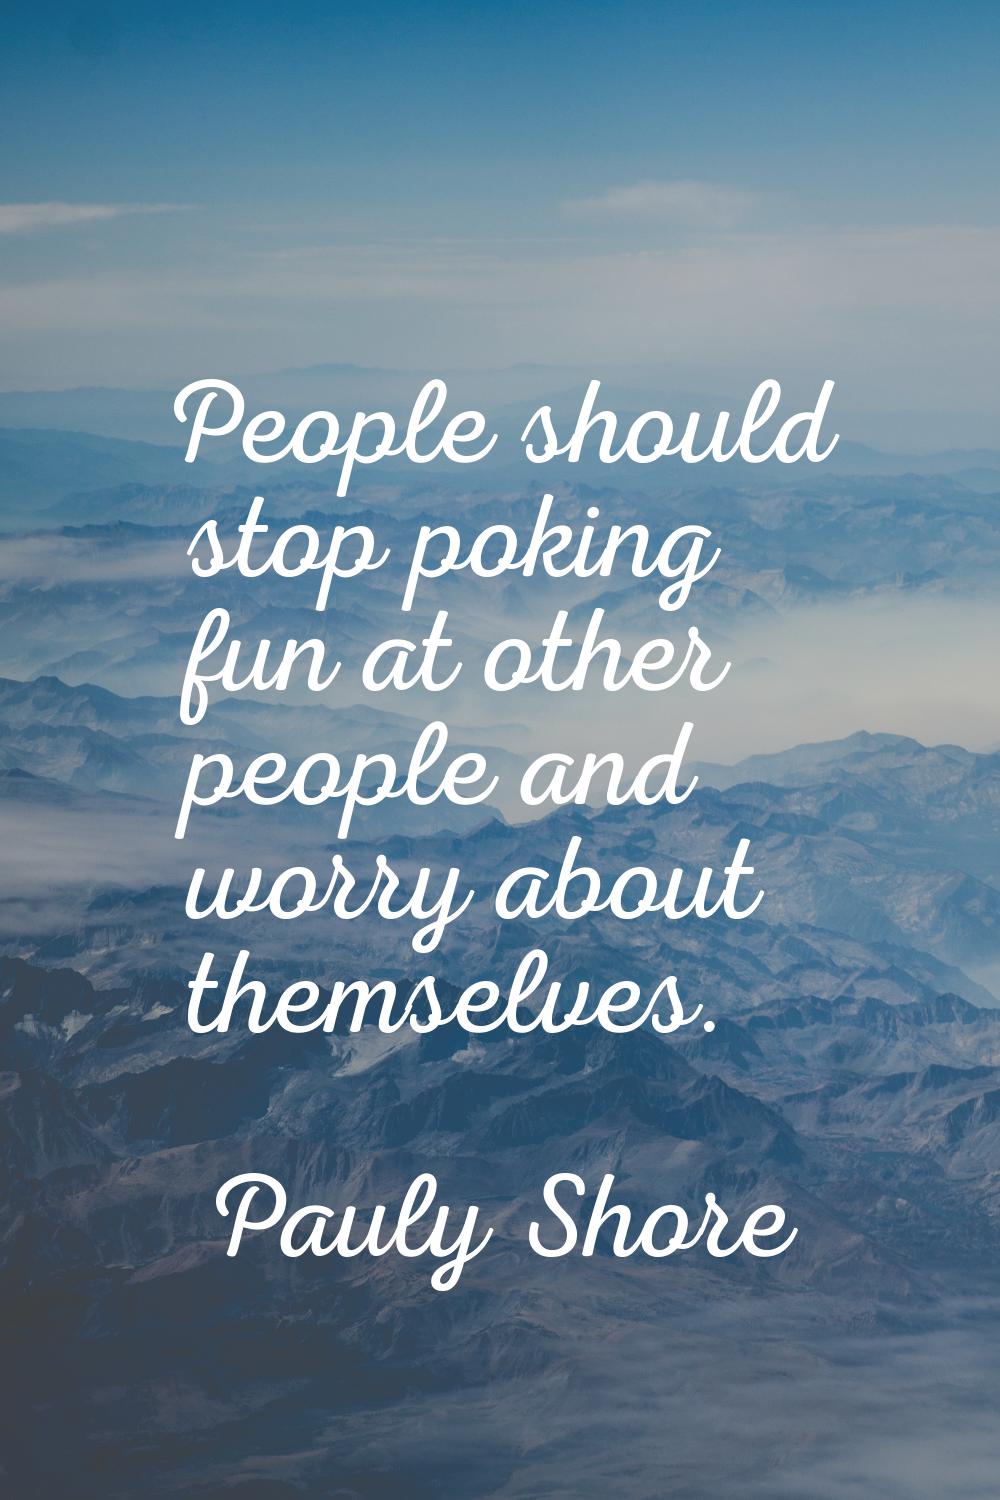 People should stop poking fun at other people and worry about themselves.